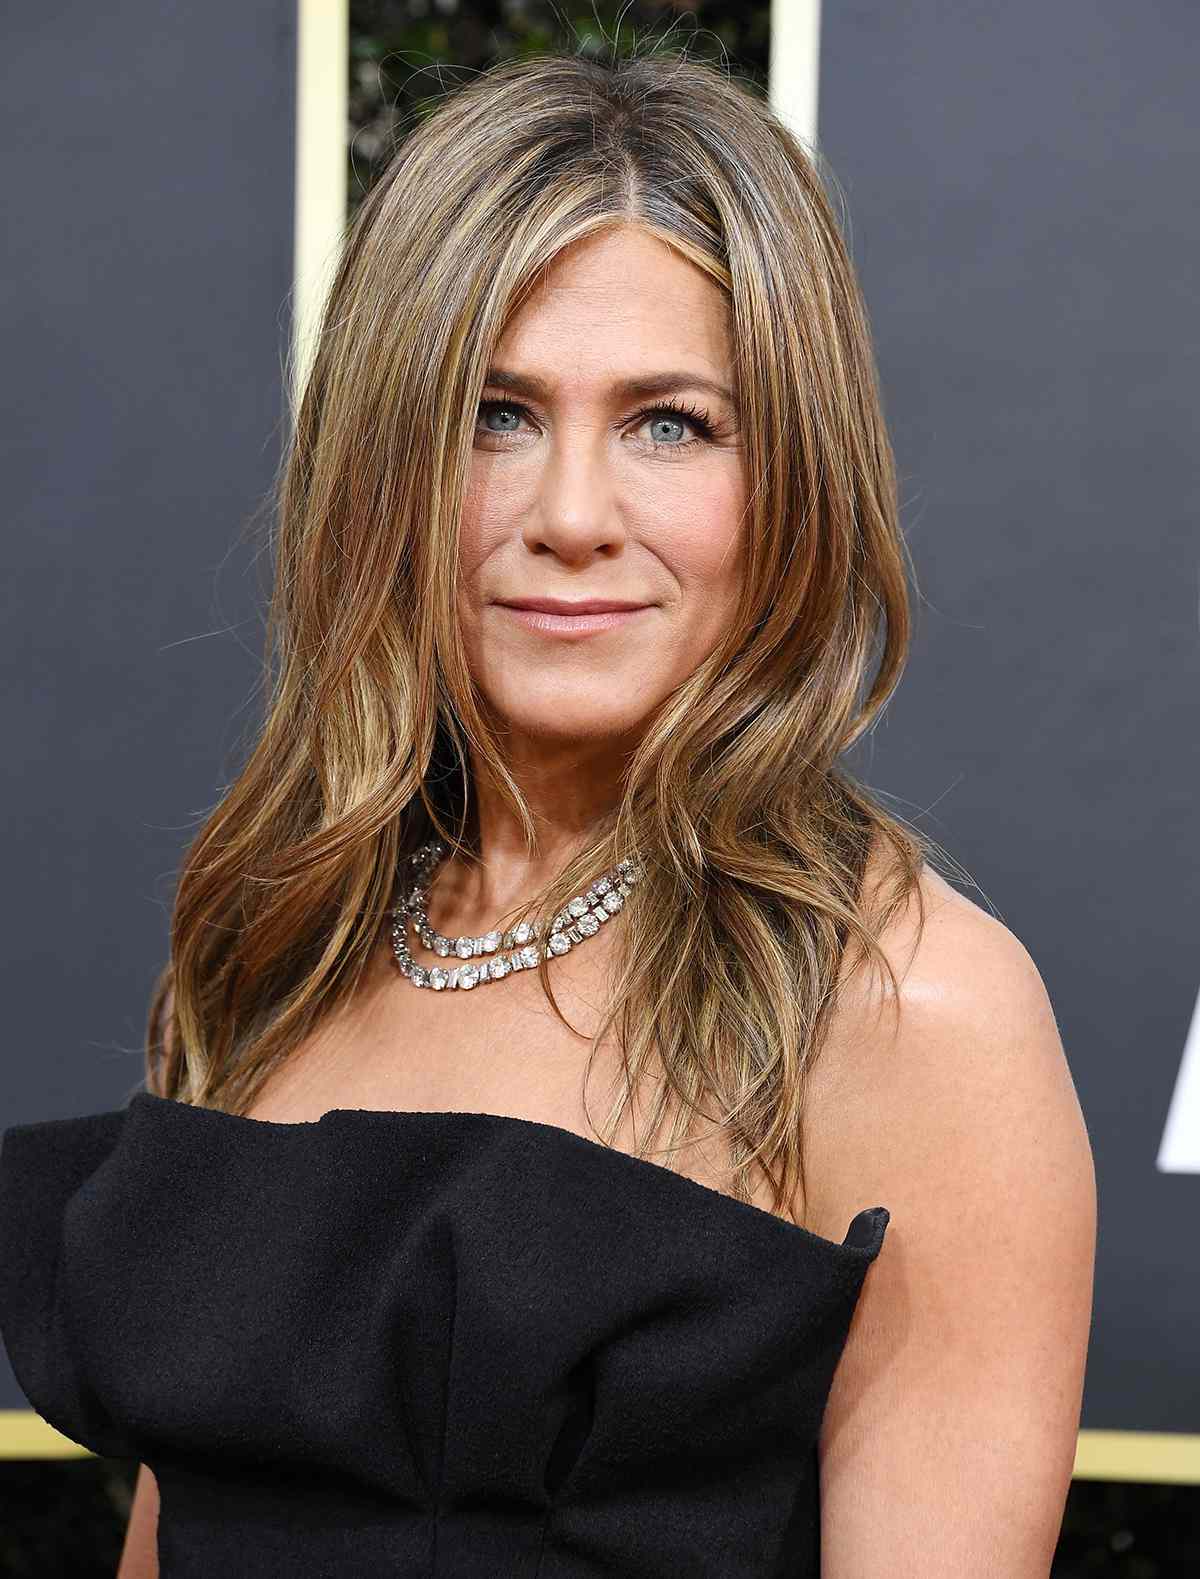 Jennifer Aniston arrives at the 77th Annual Golden Globe Awards attends the 77th Annual Golden Globe Awards at The Beverly Hilton Hotel on January 05, 2020